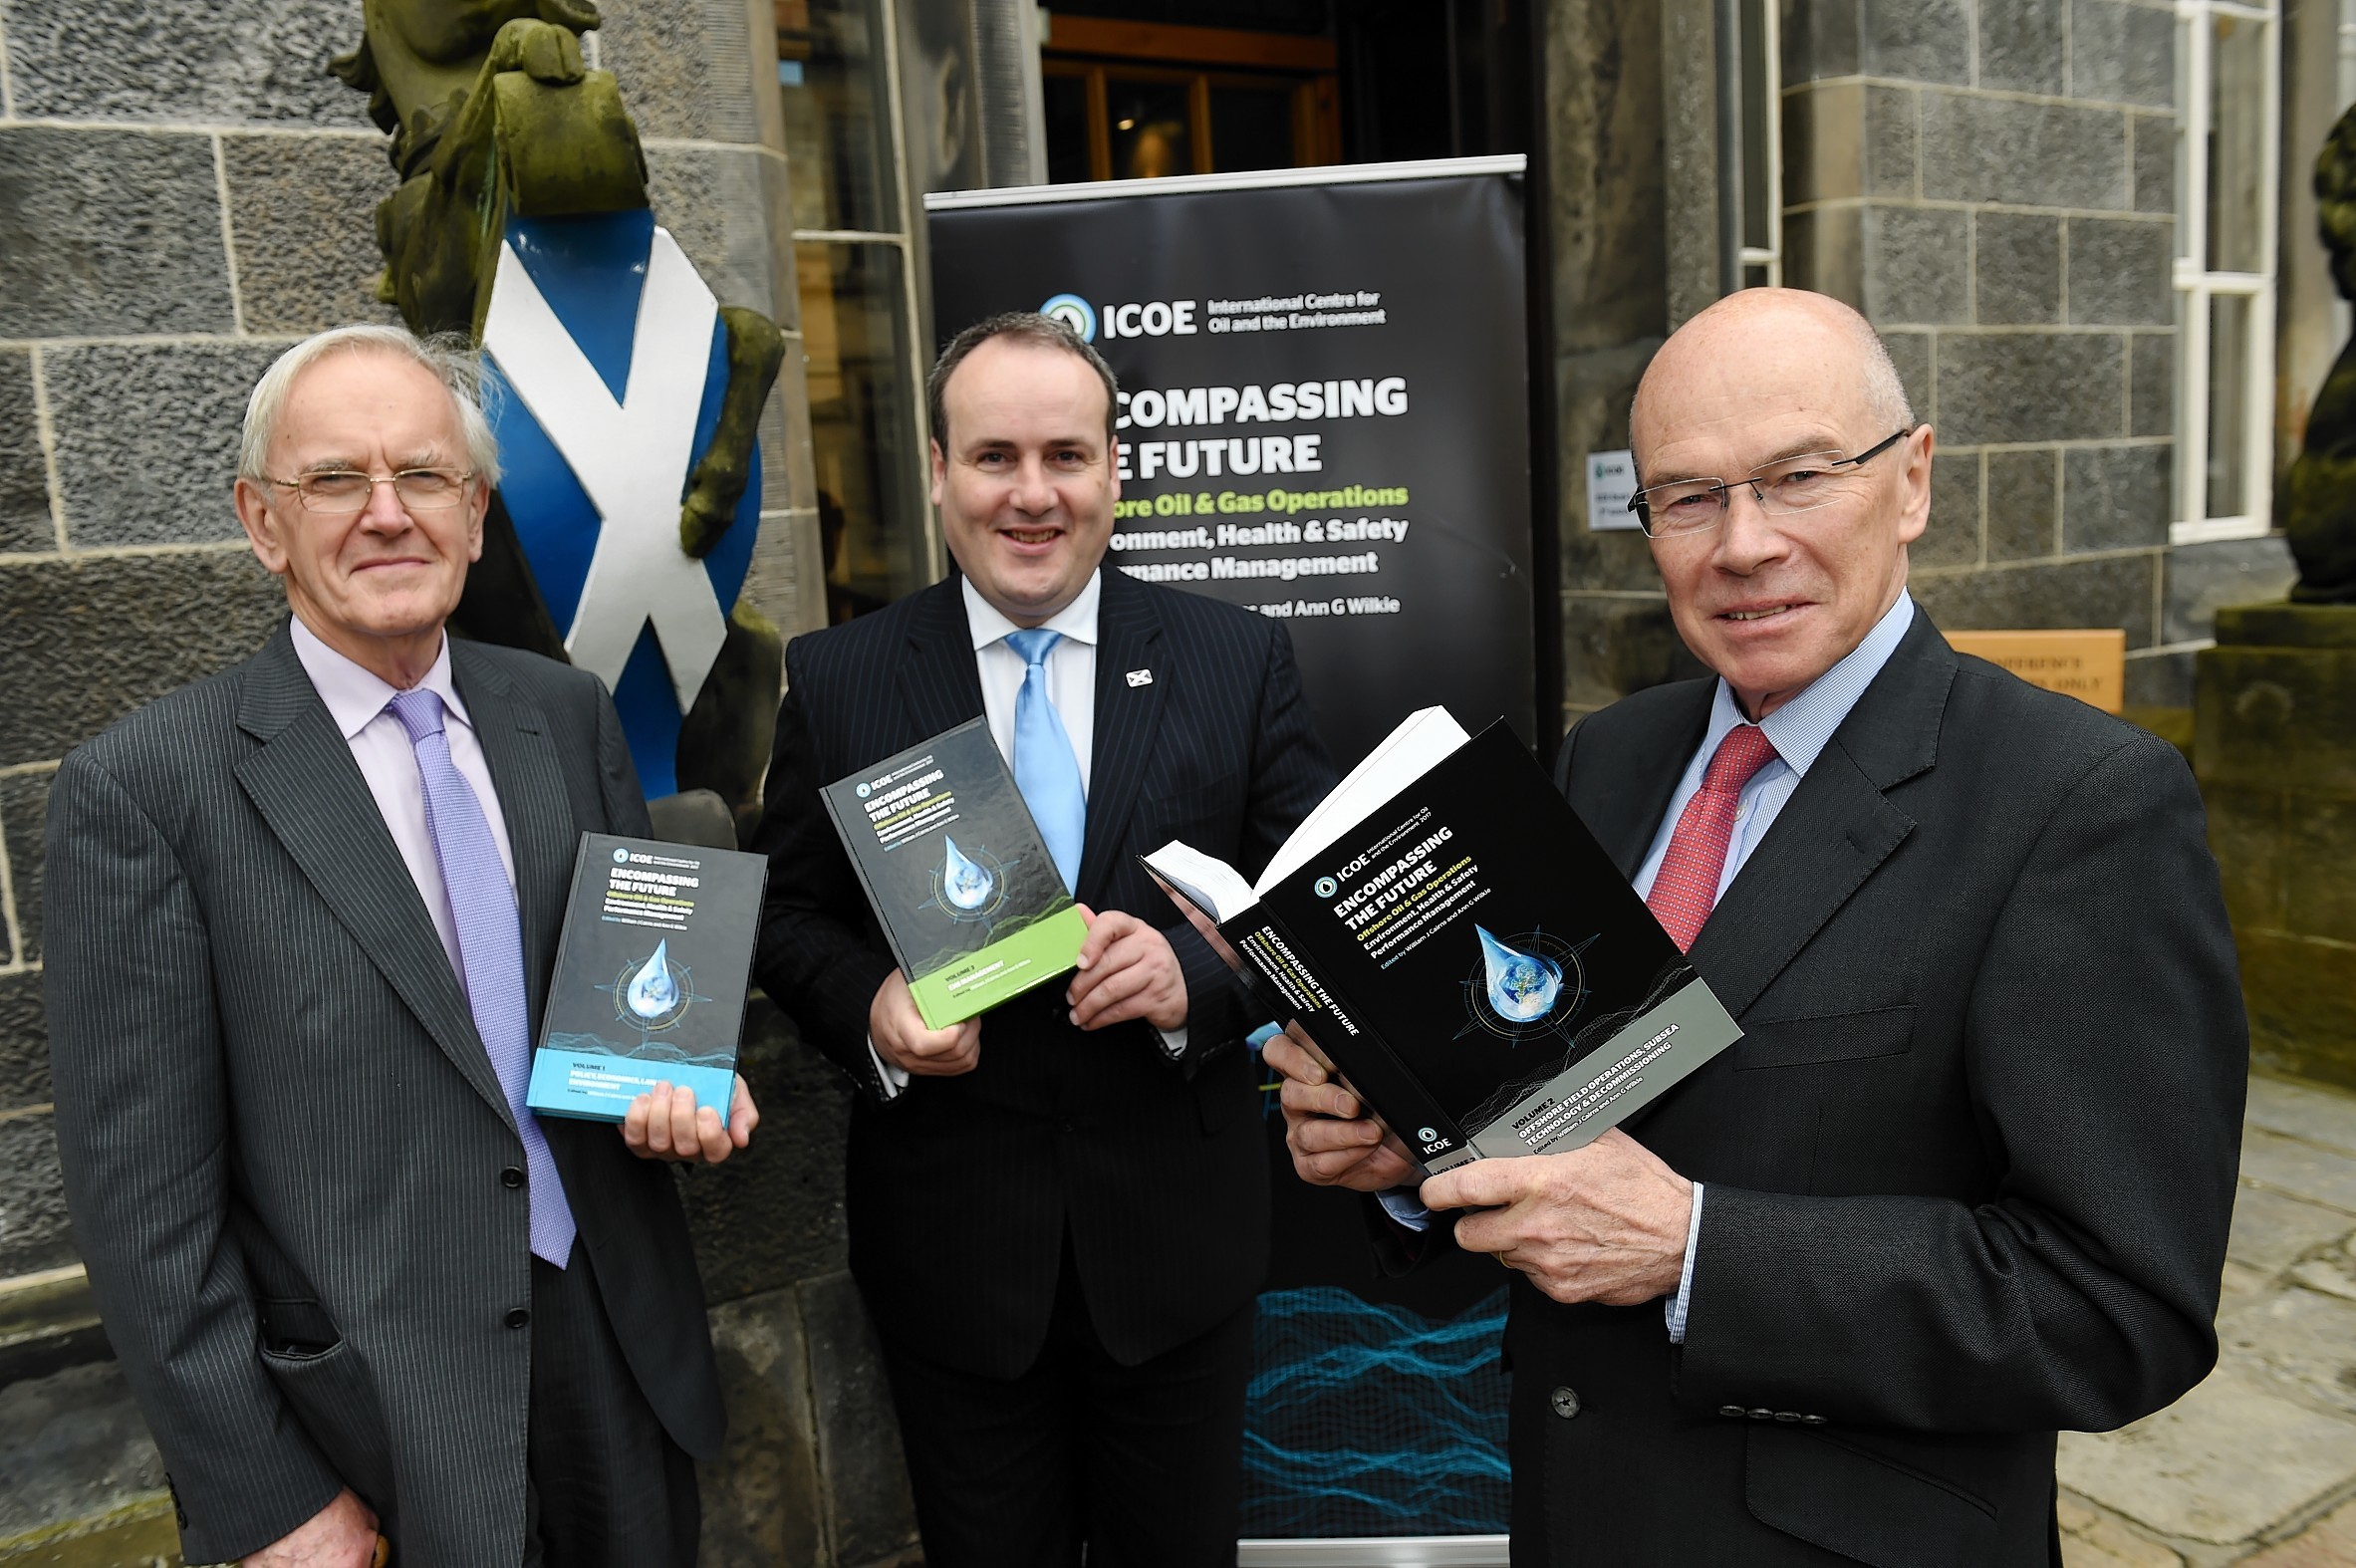 (ICOE) International Centre for Oil & Environment
Official launch of Encompassing the Future - Offshore Oil and Gas Operations  a new resource for the oil and gas industry, at Kings College Conference Centre, Aberdeen University.
Picture of (L-R) Lord Cullen, Paul Wheelhouse, Paul Warwick (chairman of ICOE).